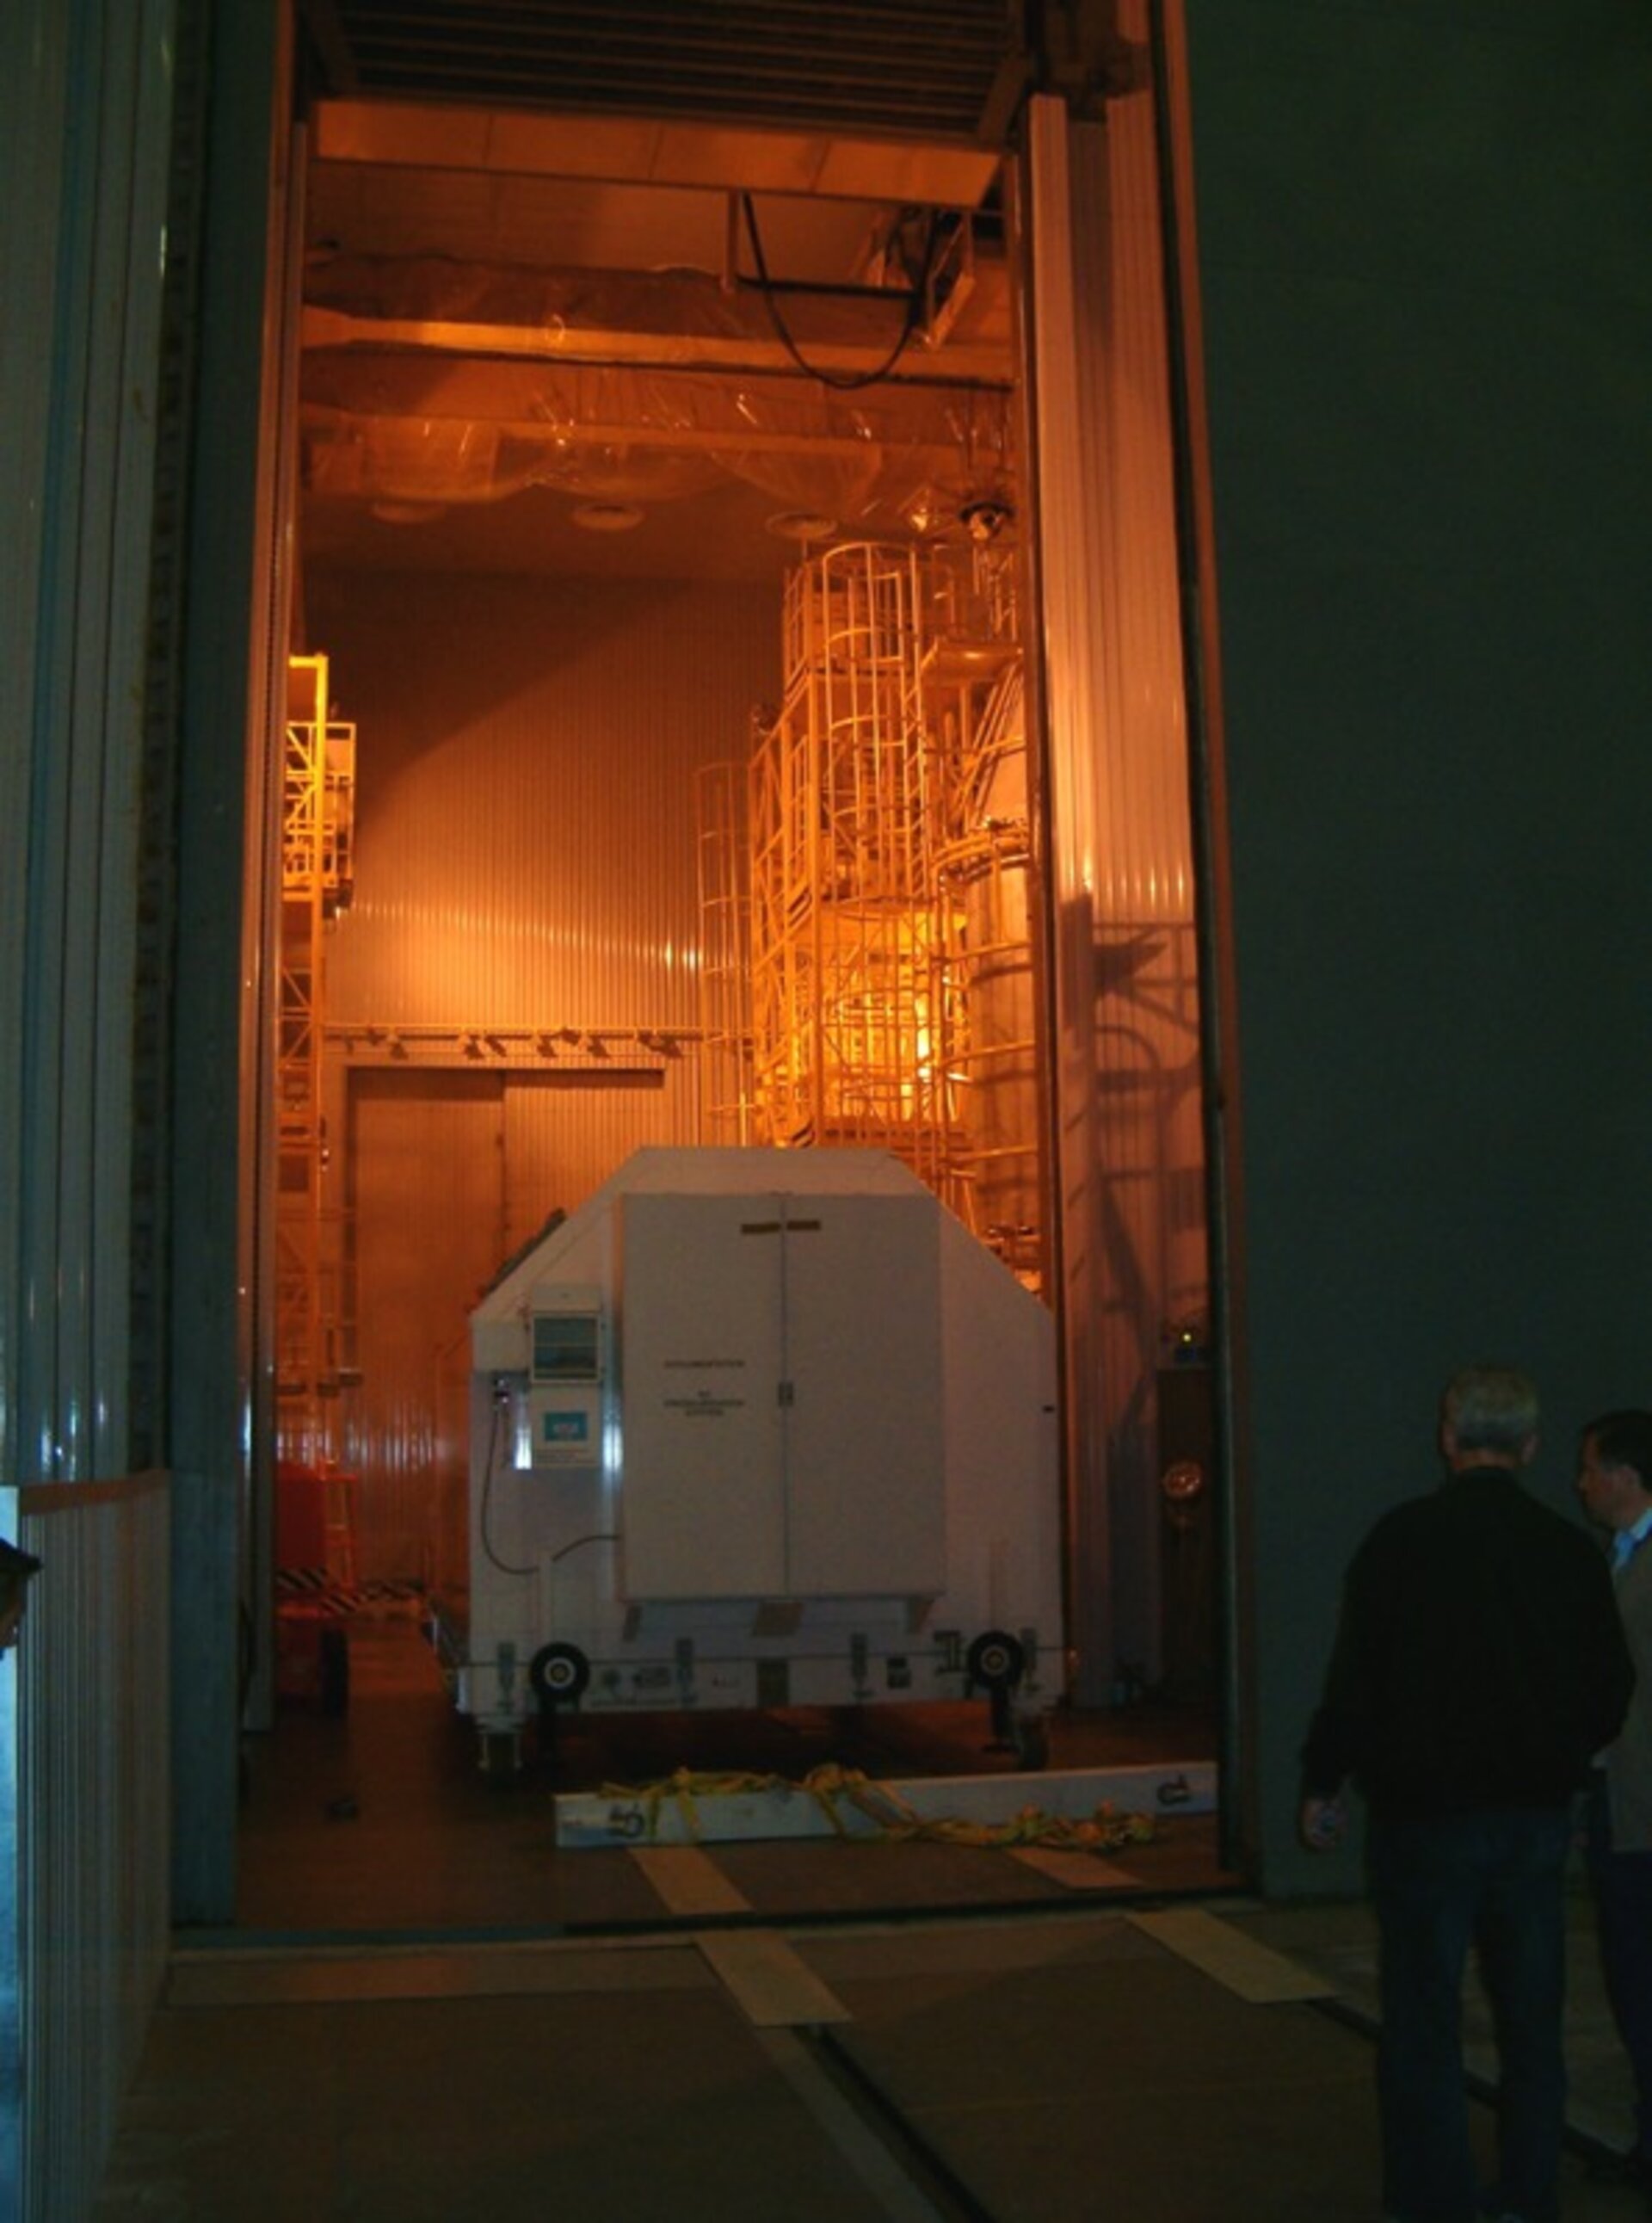 CryoSat container in airlock